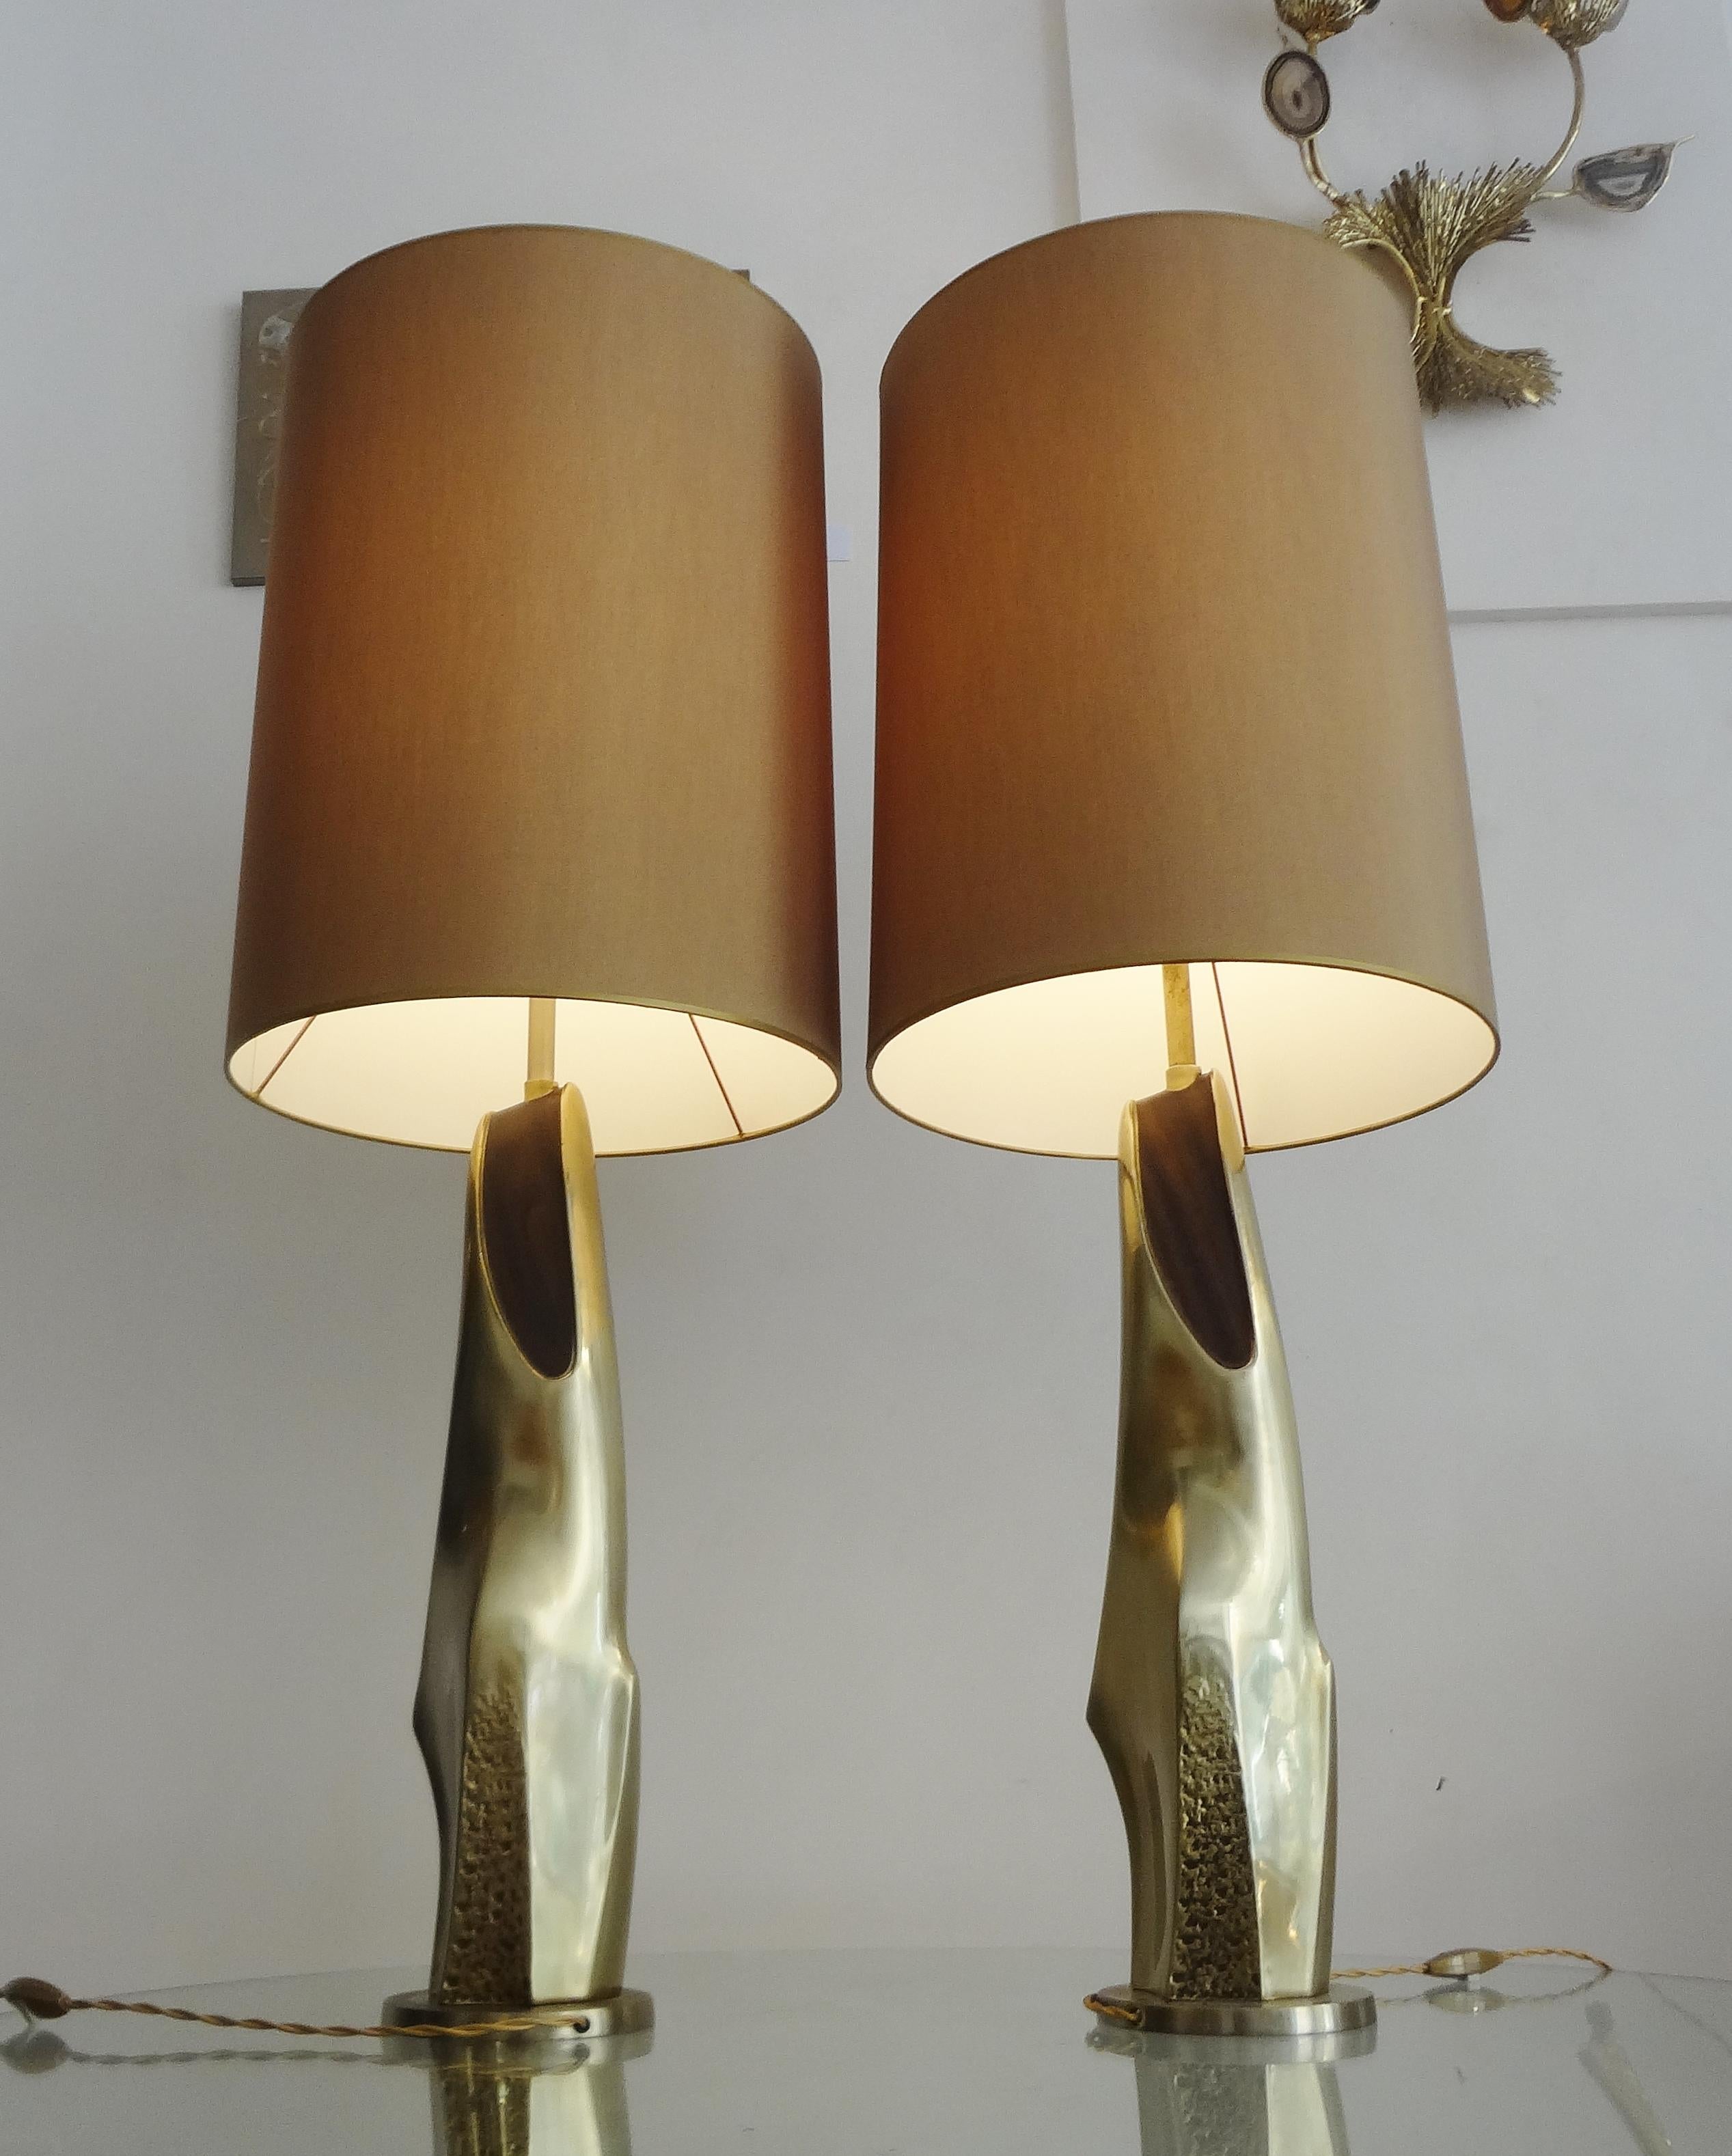 North American High Pair of Brass Table Lamps, Laurel, USA, 1970s For Sale